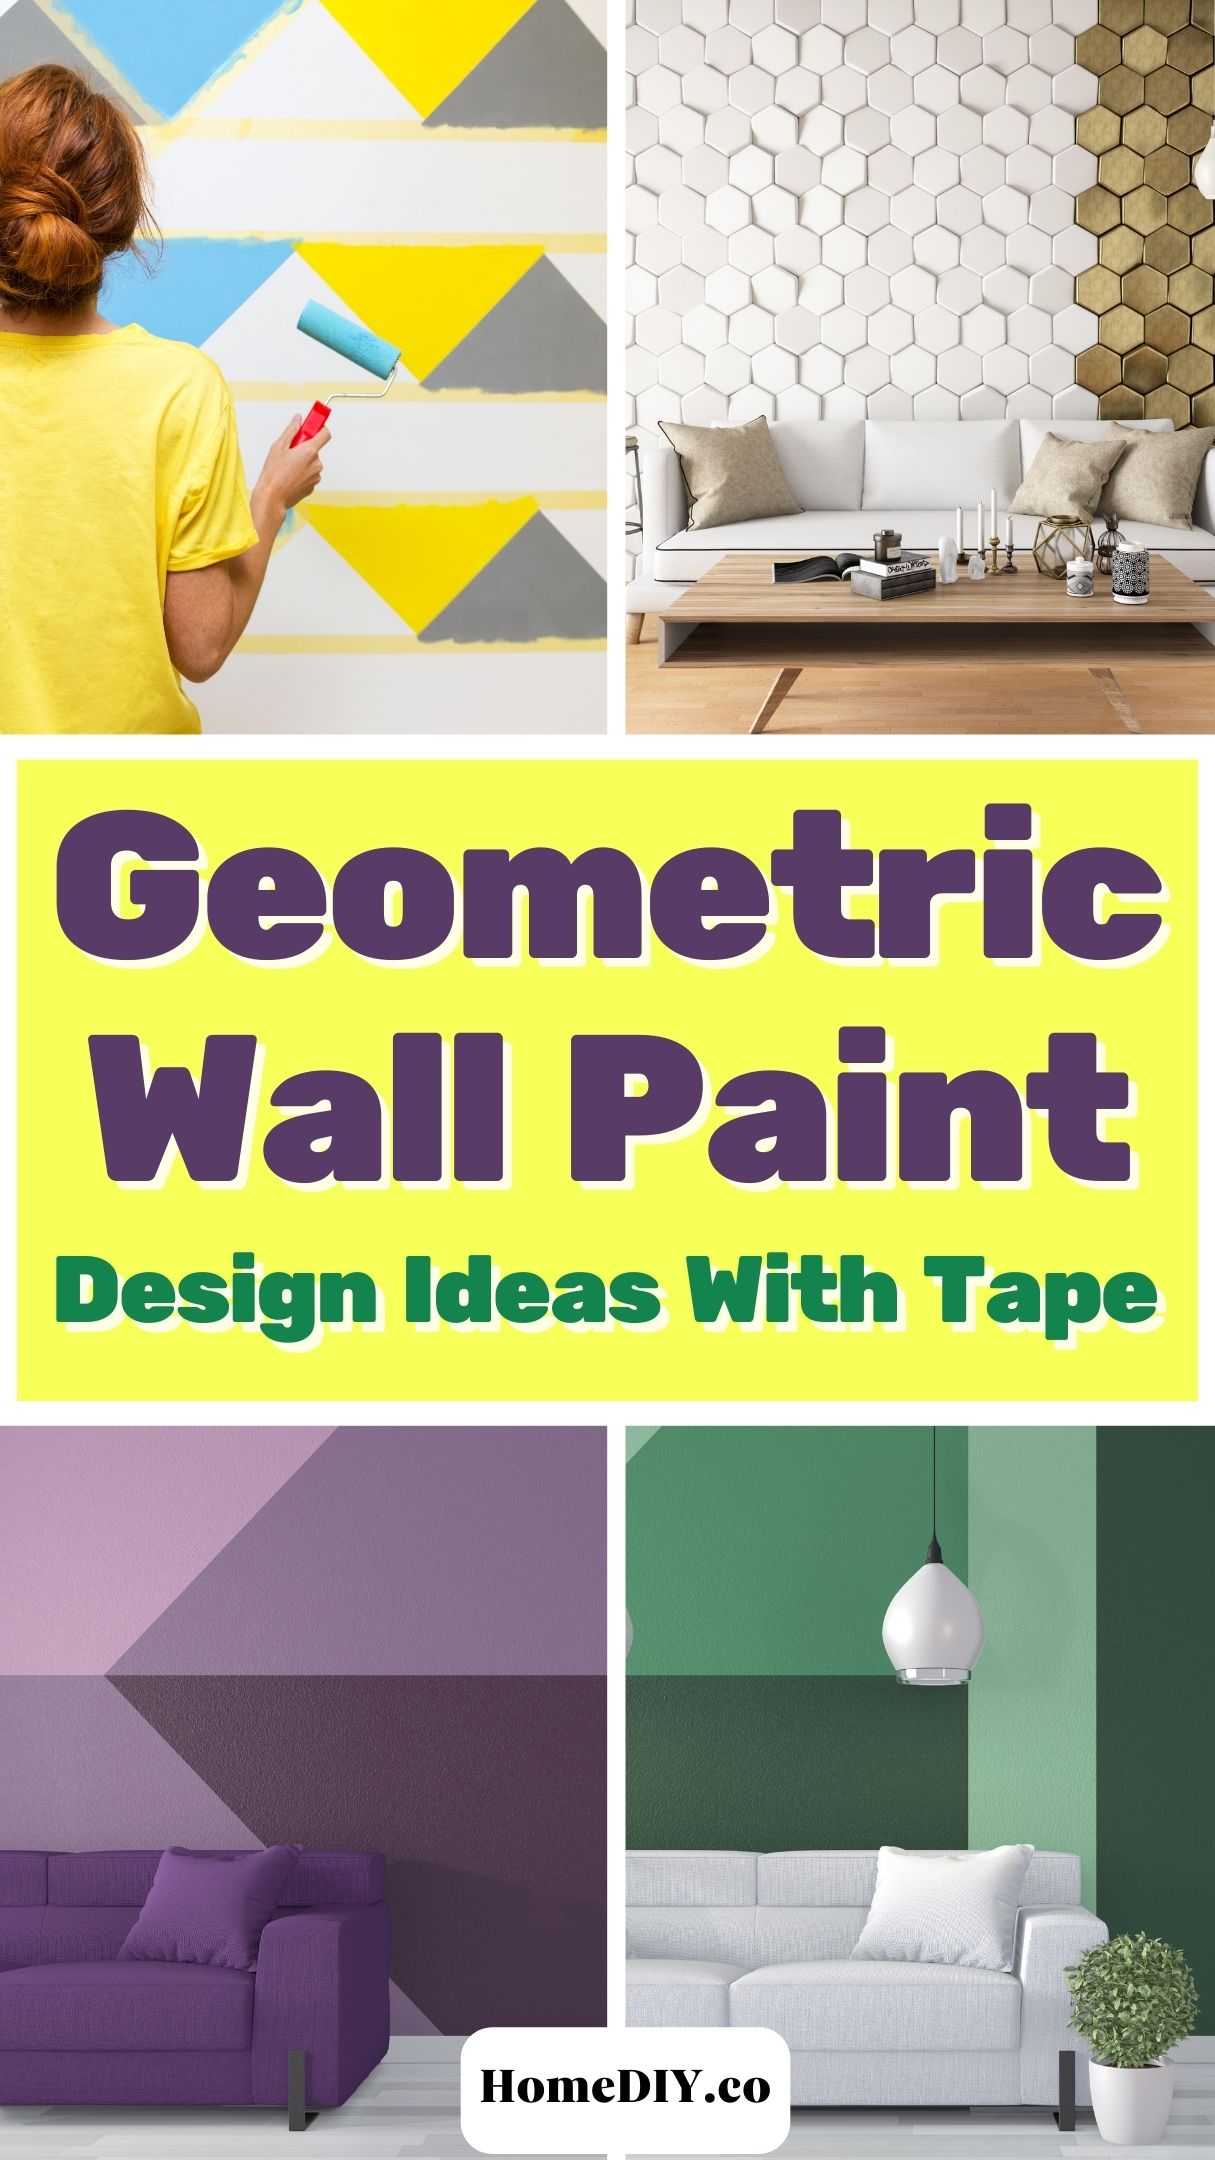 Geometric Wall Paint: Design Ideas With Tape